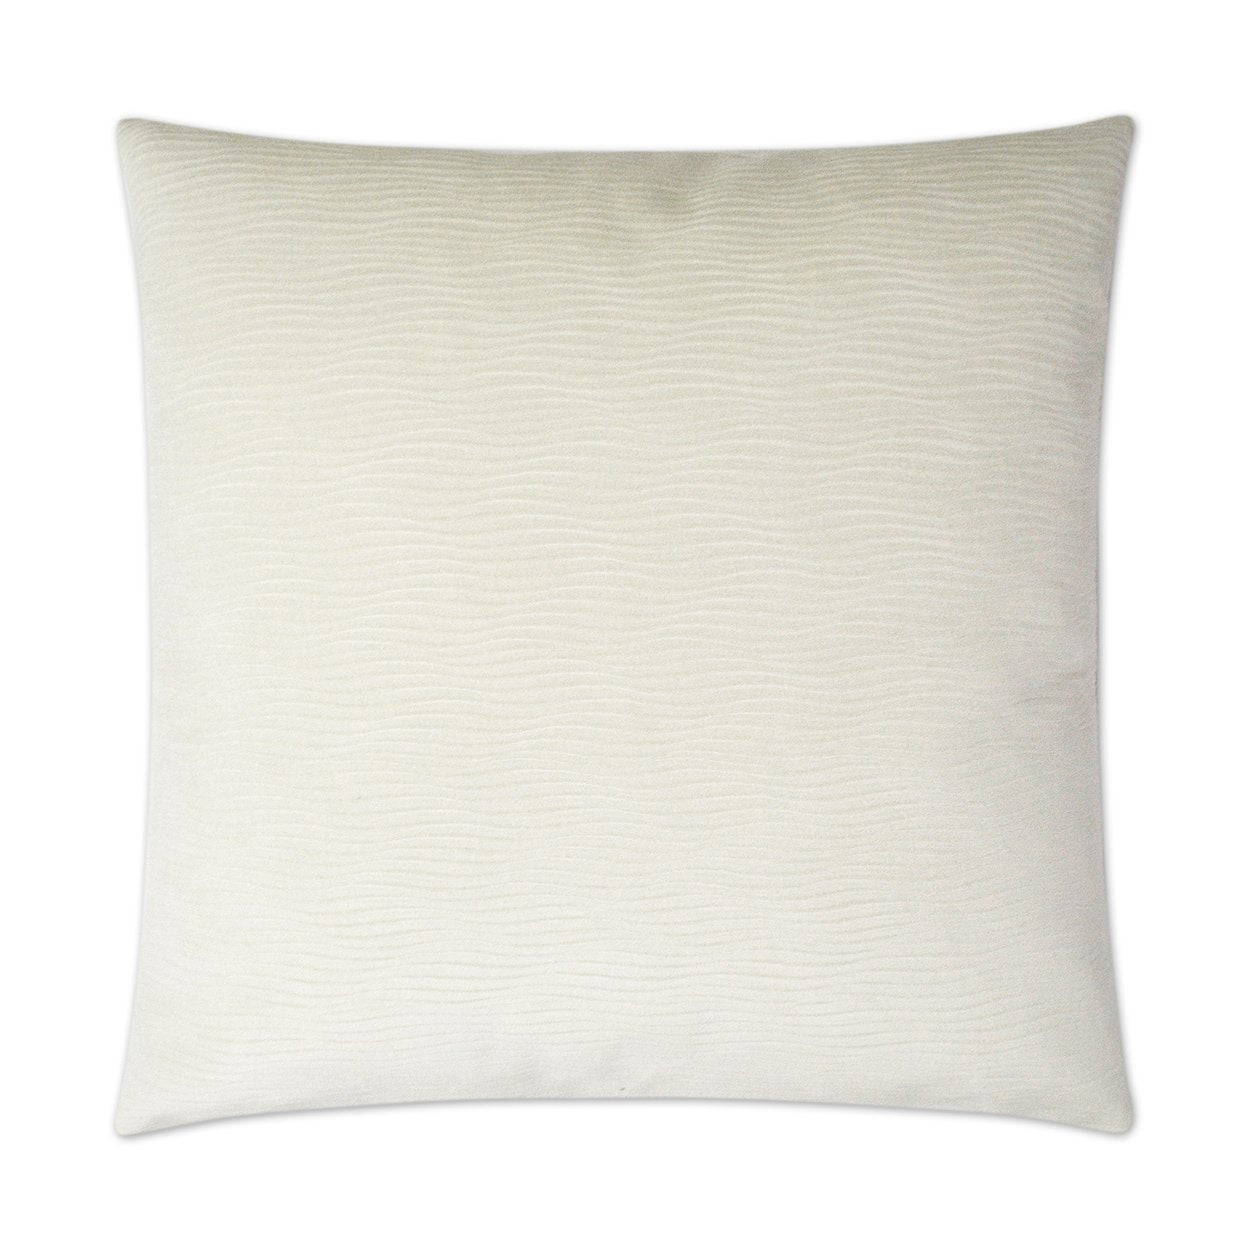 Luxury Pillow - 24” x 24” - Stream Ivory; Solid ivory in a smooth wavey patterned fabric